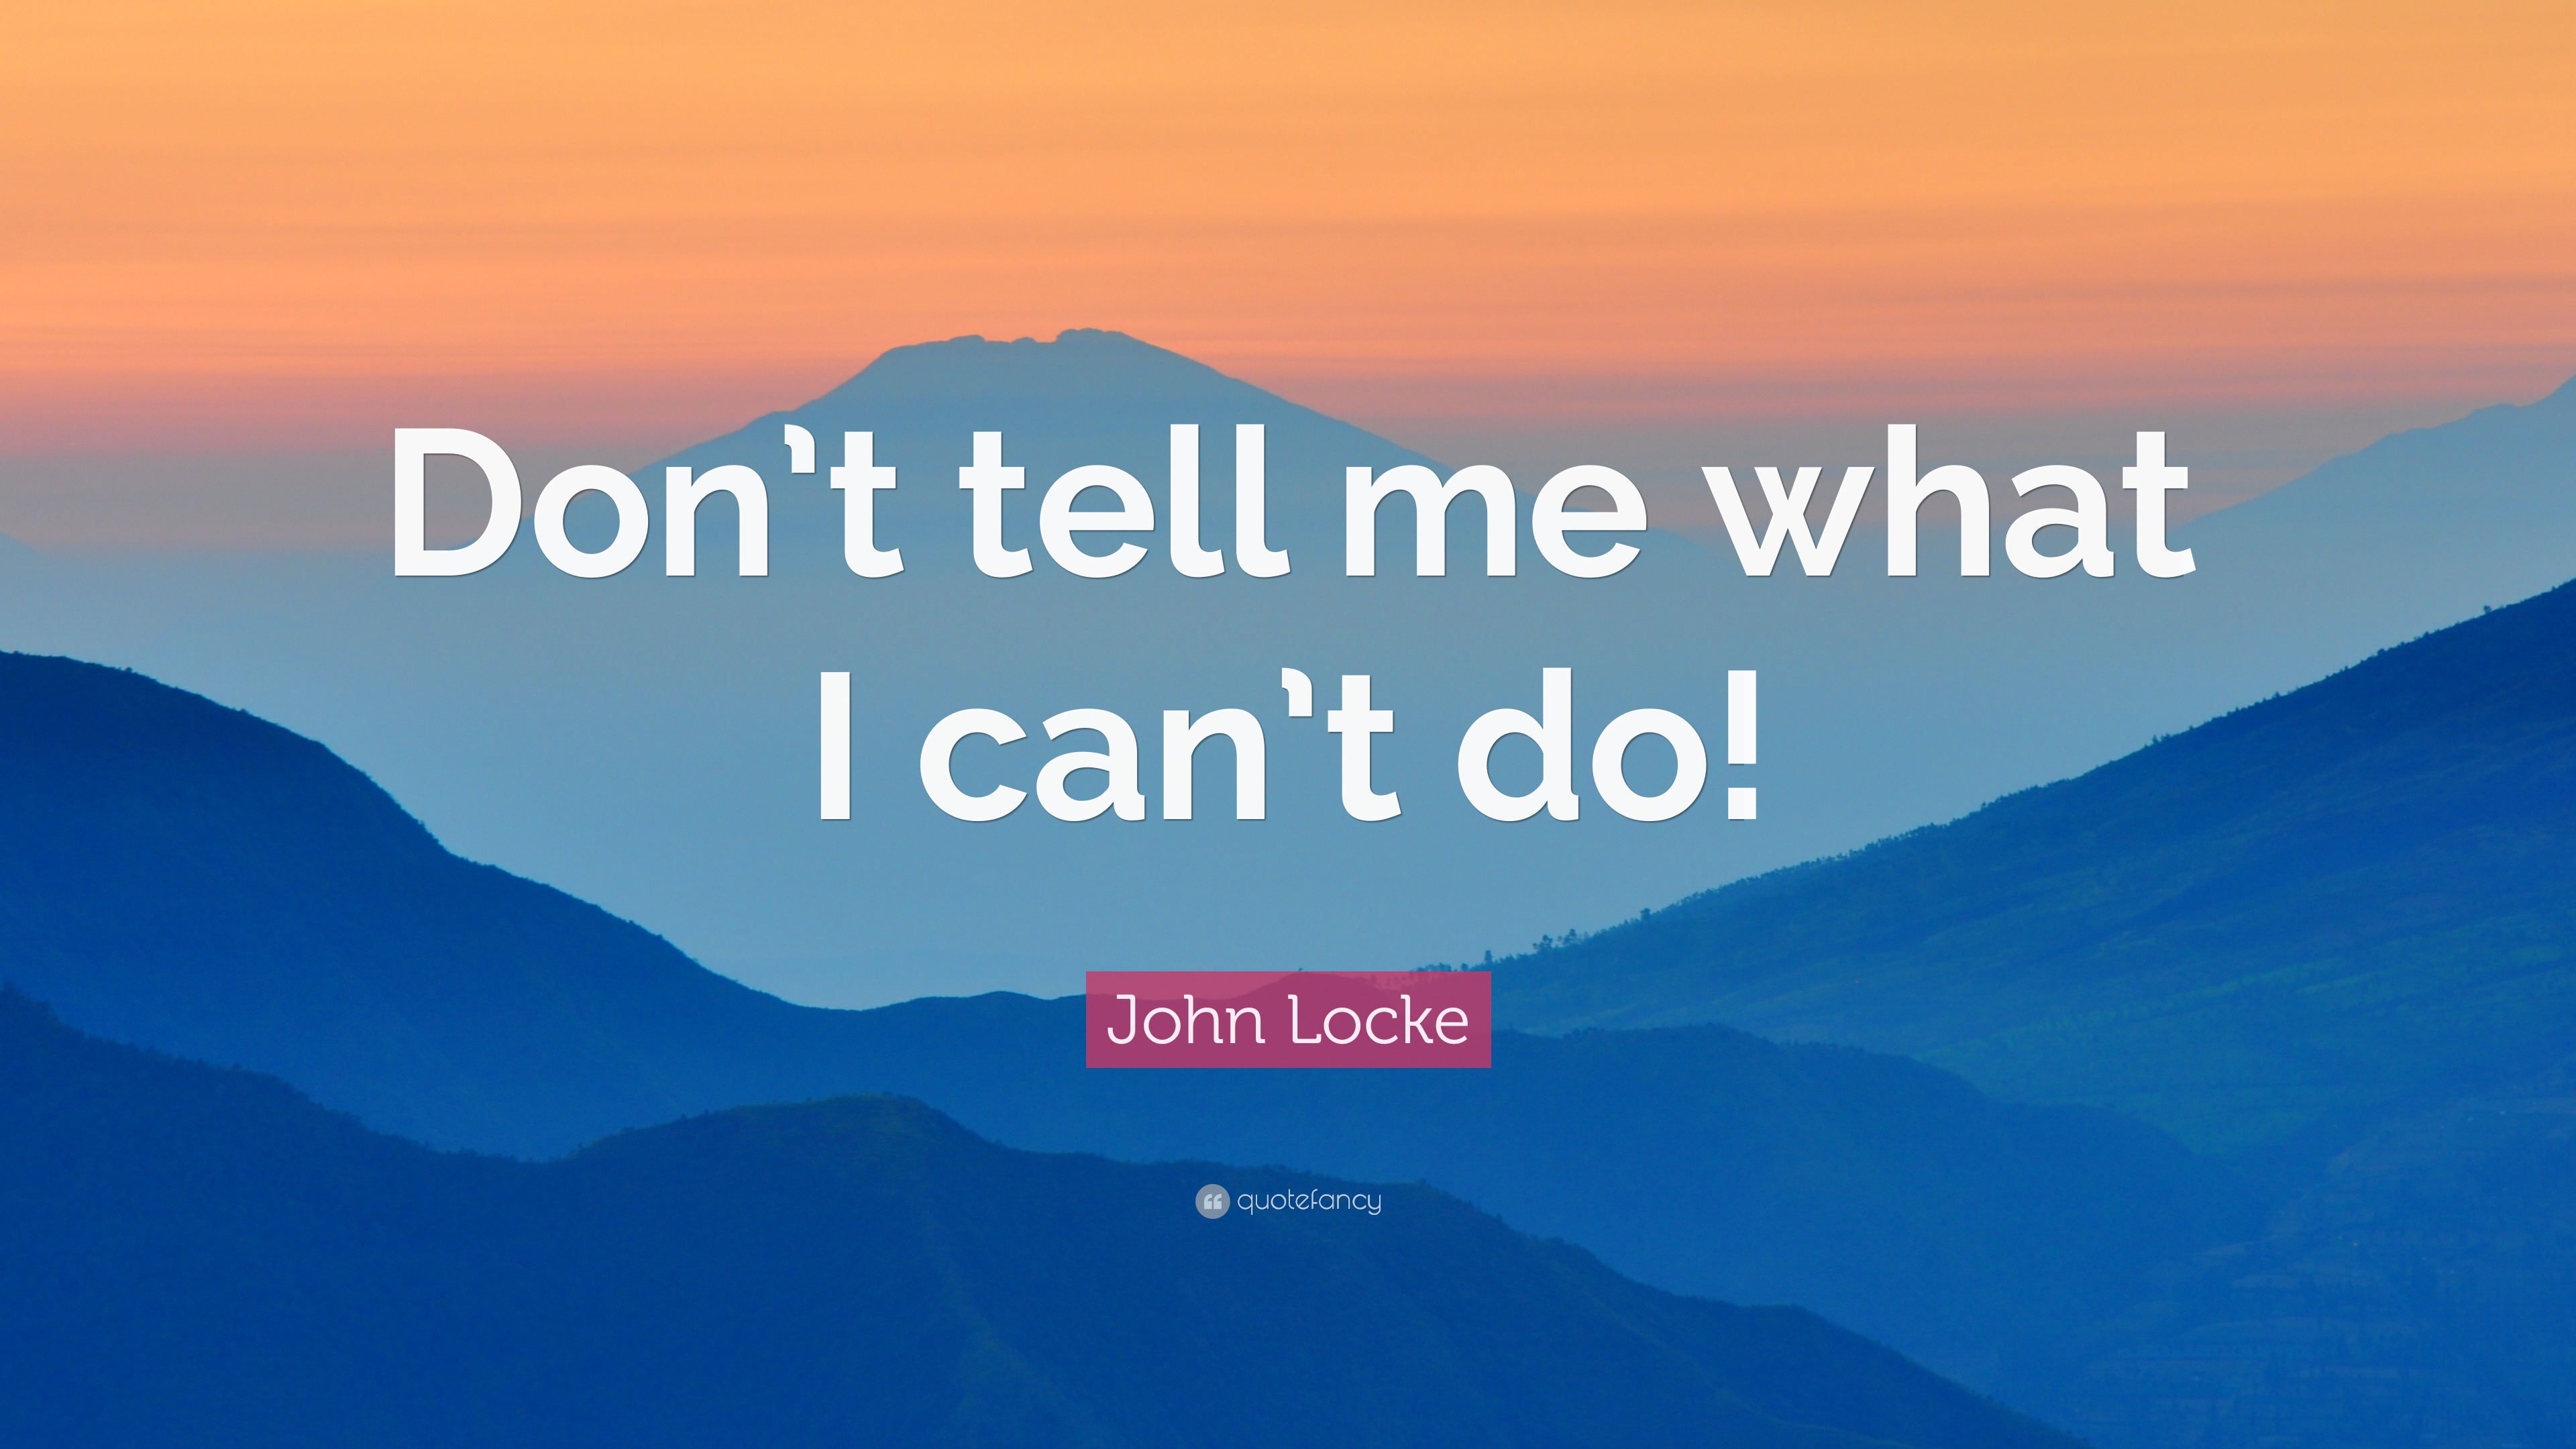 John Locke Quote: “Don’t tell me what I can’t do!” (12 wallpapers